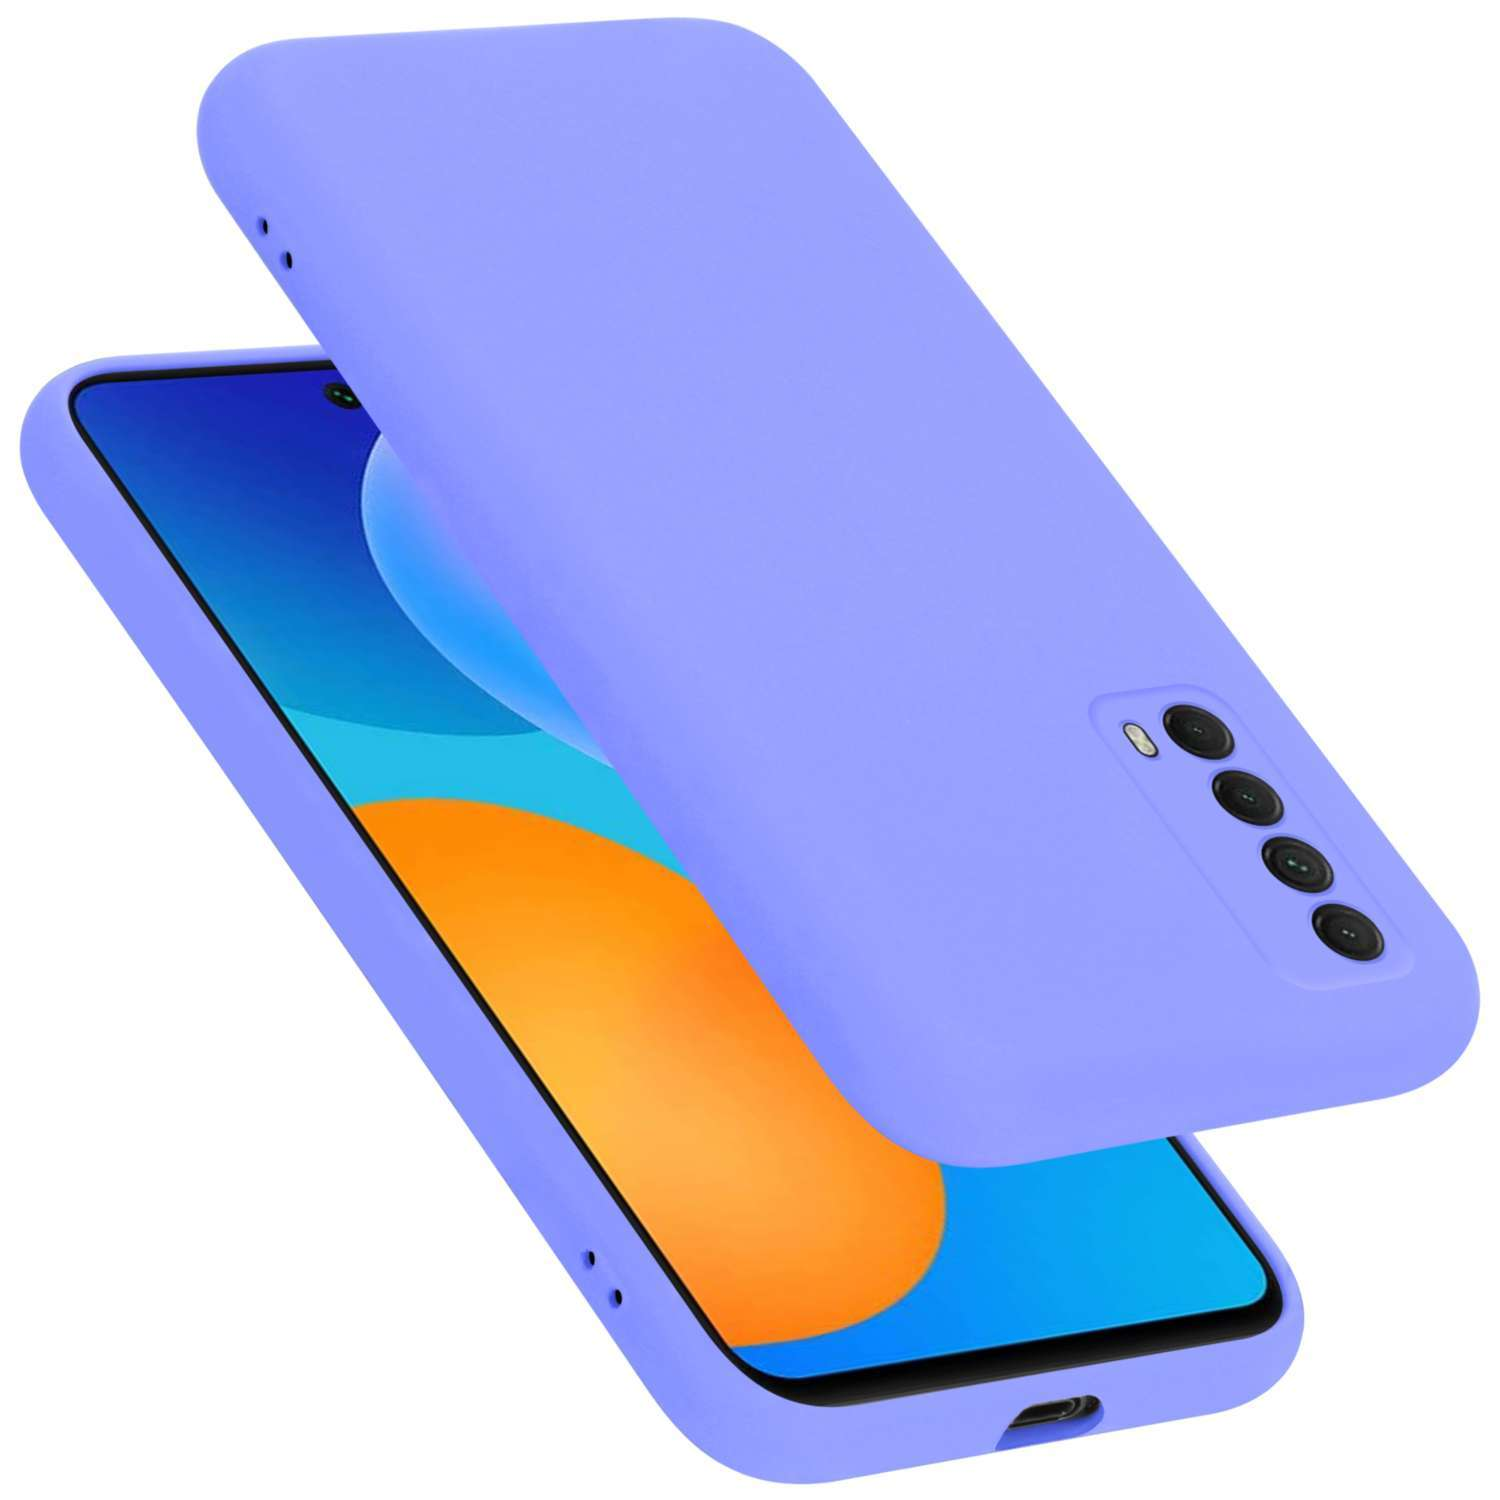 LILA Silicone HELL Liquid 2021, Huawei, Backcover, LIQUID im Case Hülle Style, SMART P CADORABO